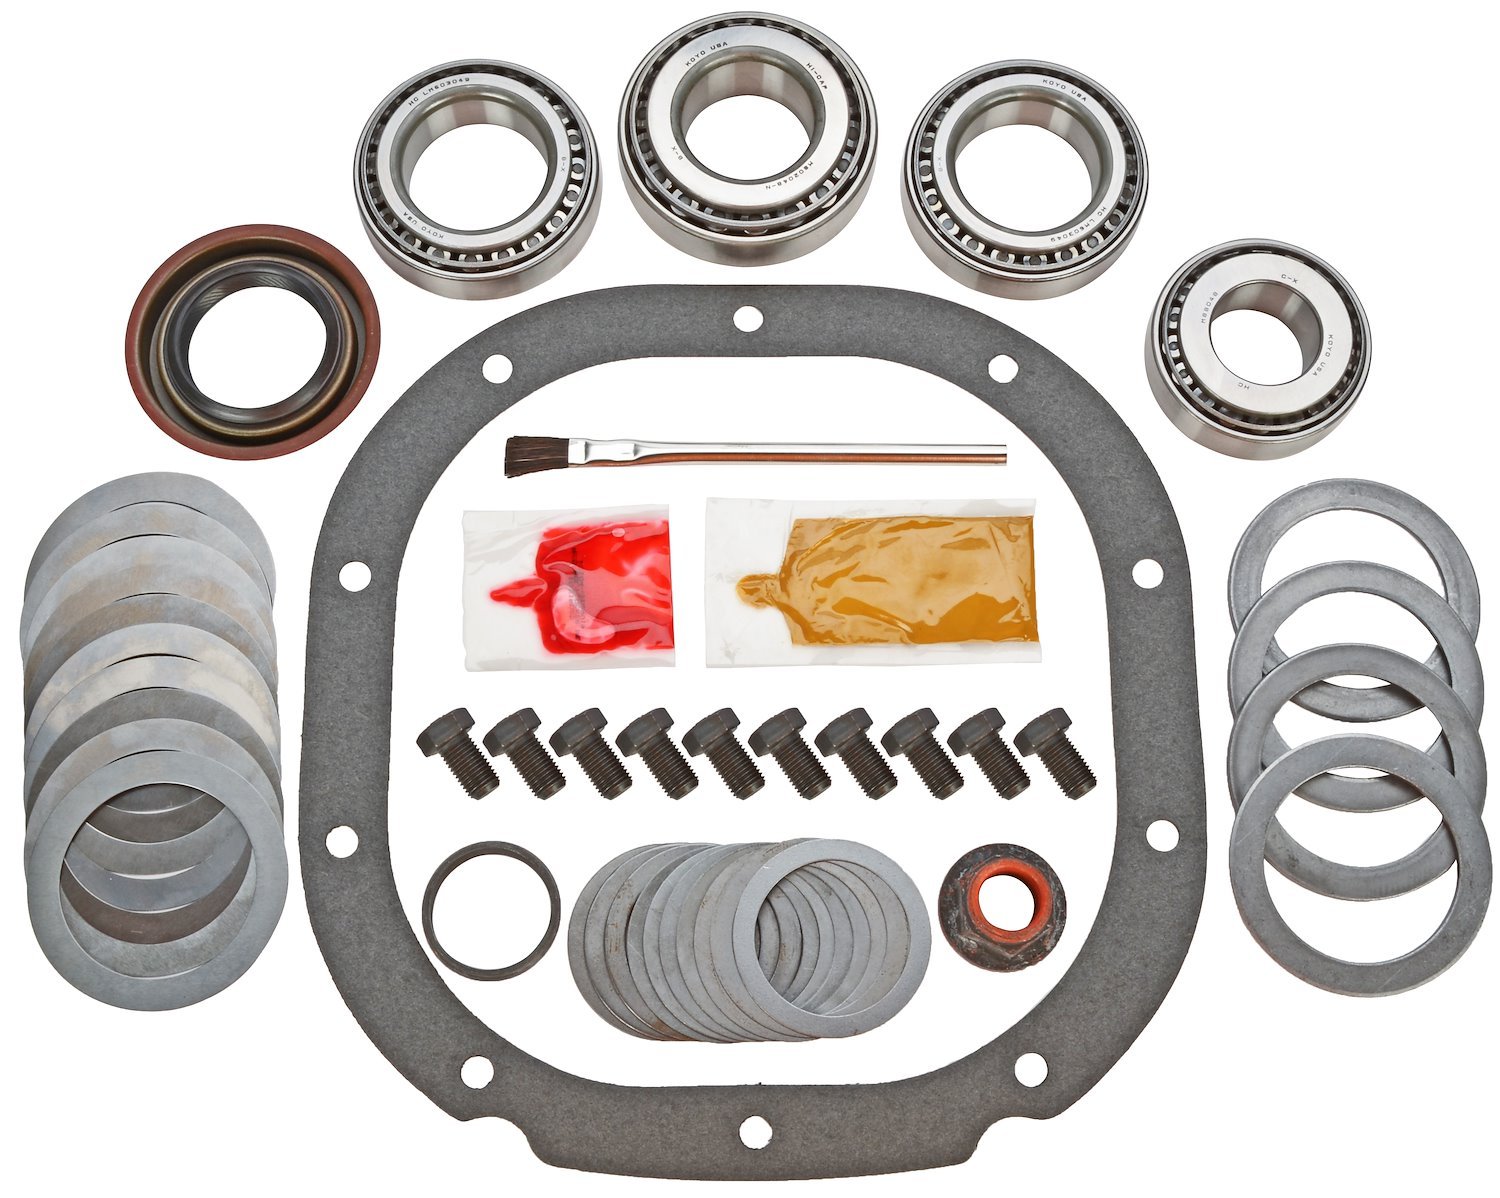 Complete Differential Installation Kit for Ford 8.8 in. (10-Bolt) 1977-1984 Ford Car